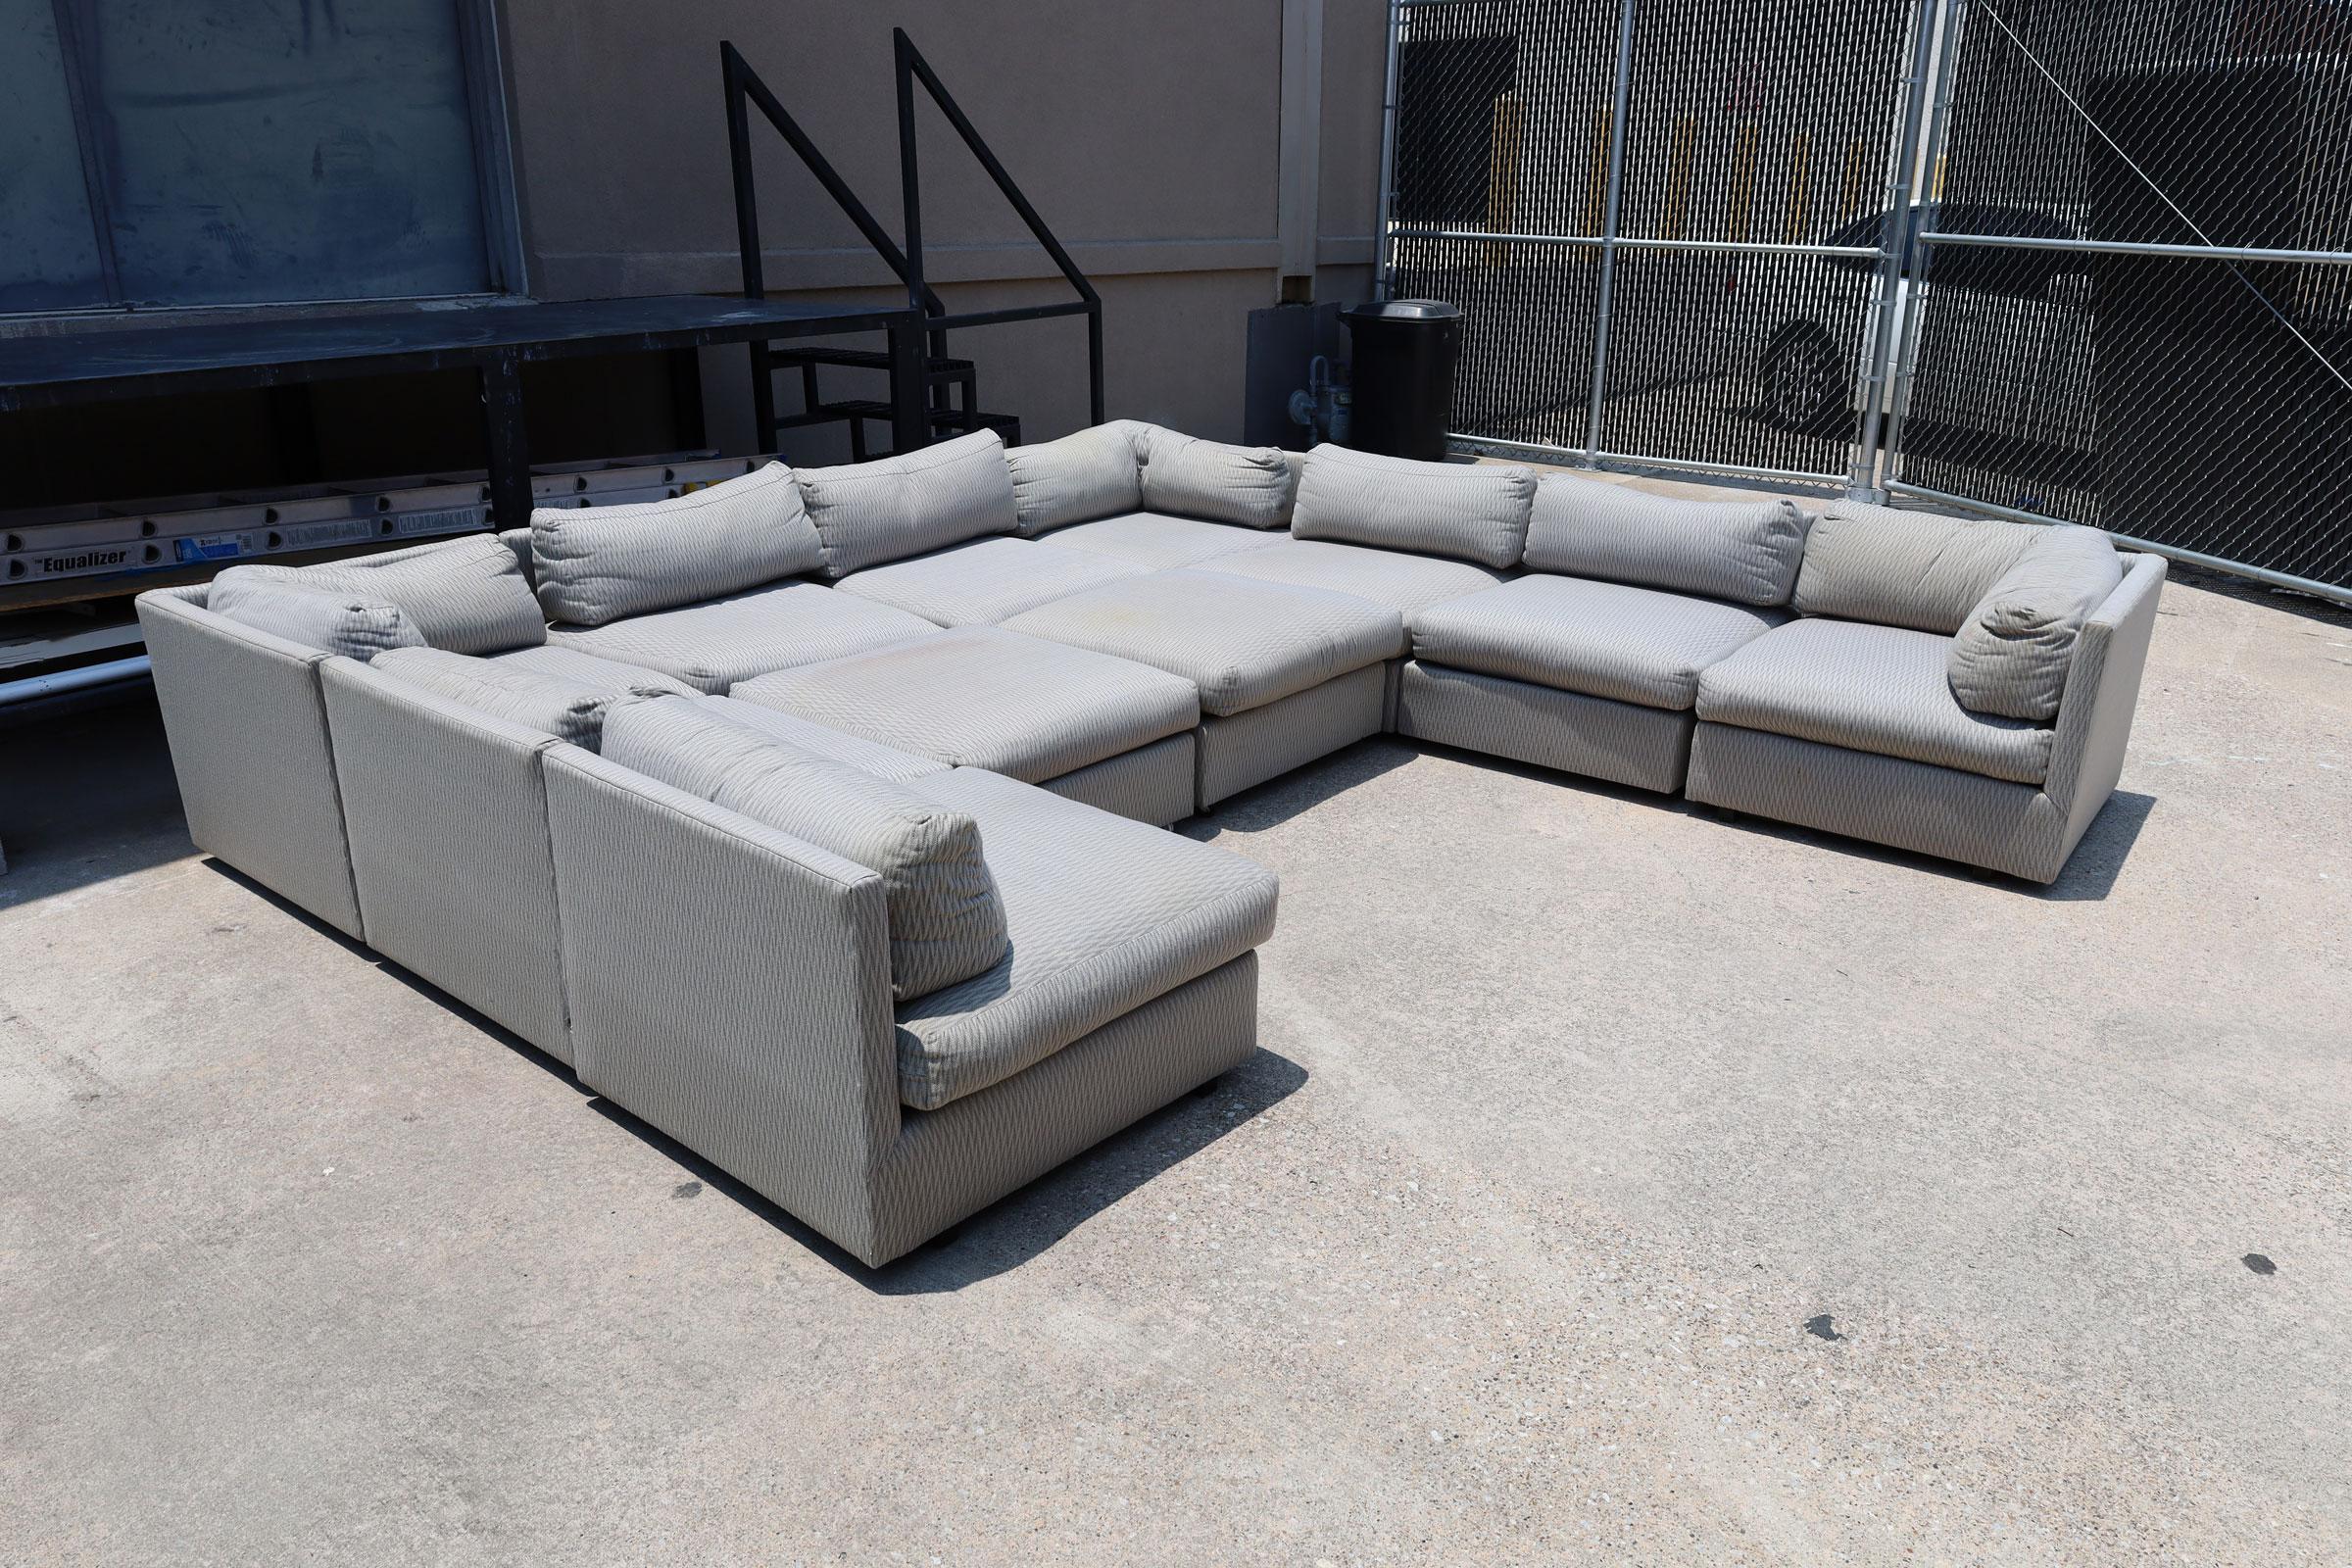 This sofa is very versatile and can be arranged in numerous configurations. The listing measurements are for the sofa as configured in lead photo. Each corner piece measures 33